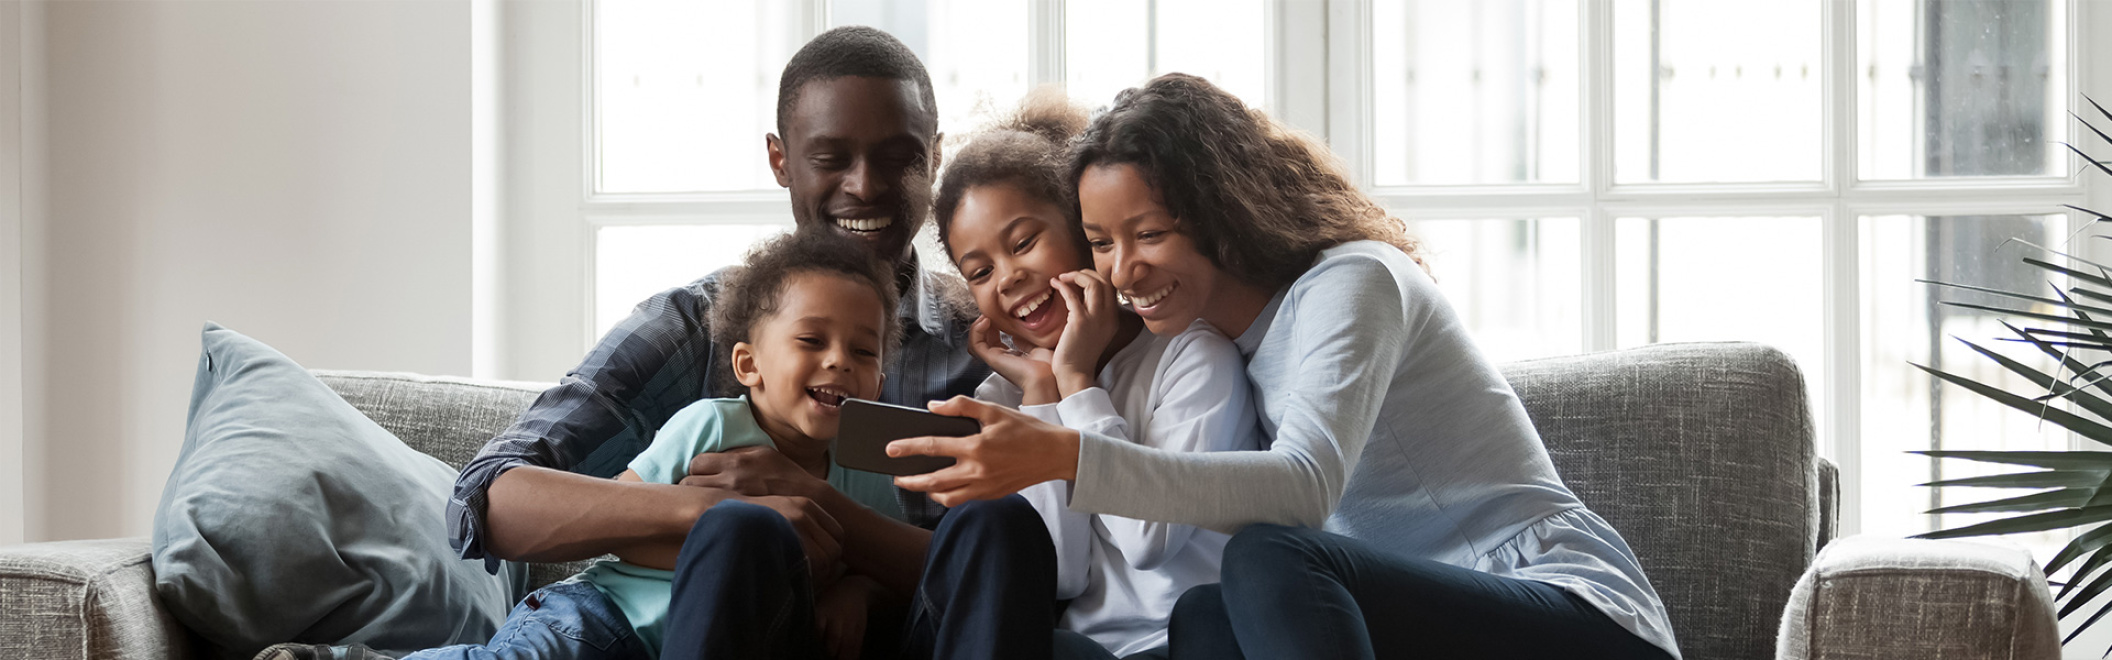 family laughing together on their mobile phone